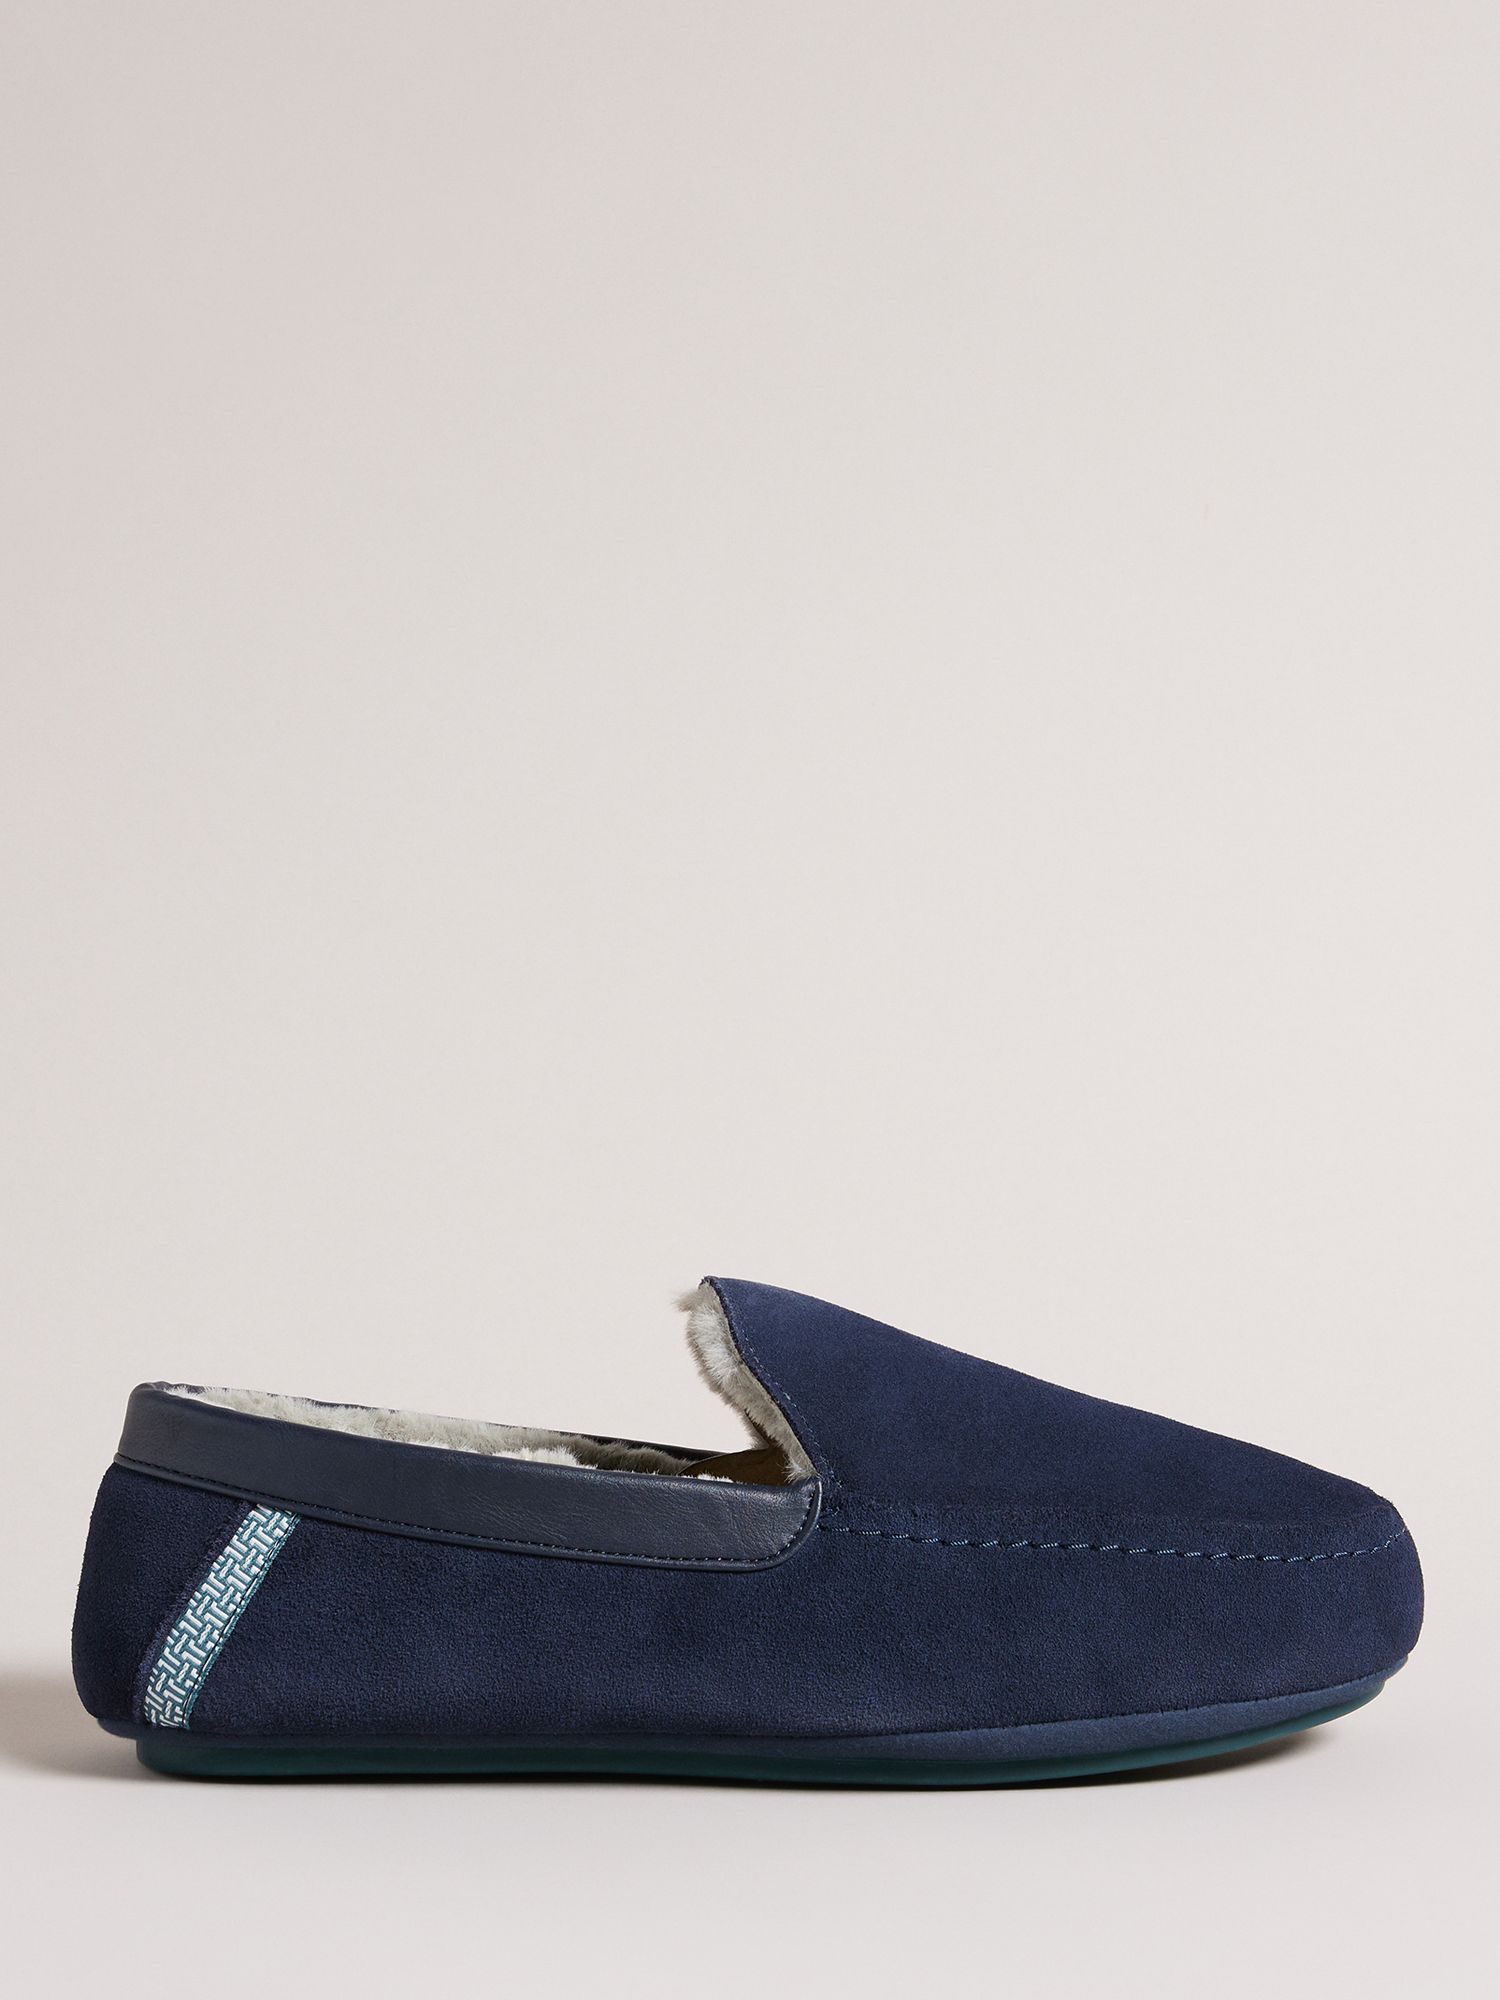 Ted Baker Vallant Suede Moccasin Slippers, Navy at John Lewis & Partners